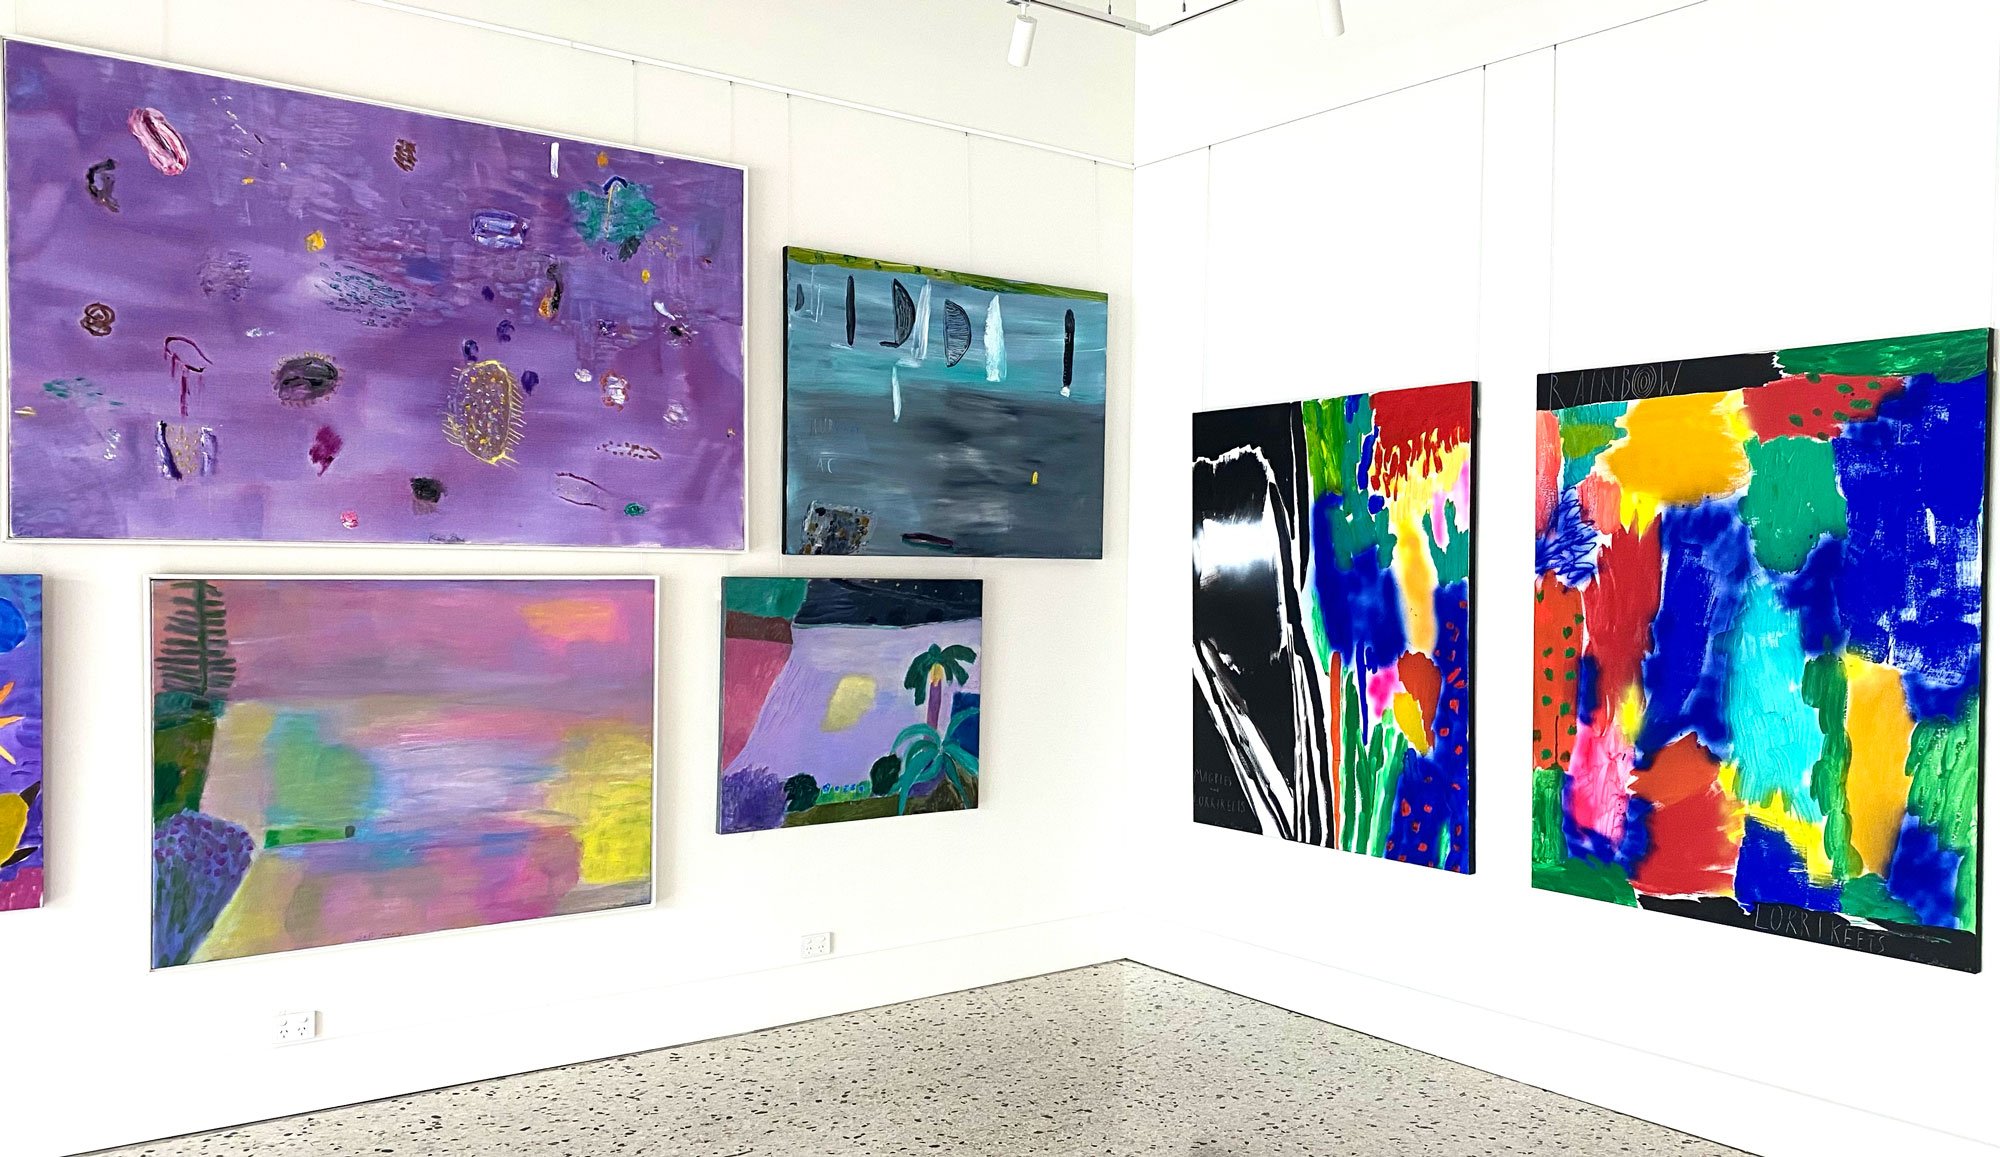 A selection of Ken Done's artworks hanging on the walls of the Bluethumb's Richmond gallery.